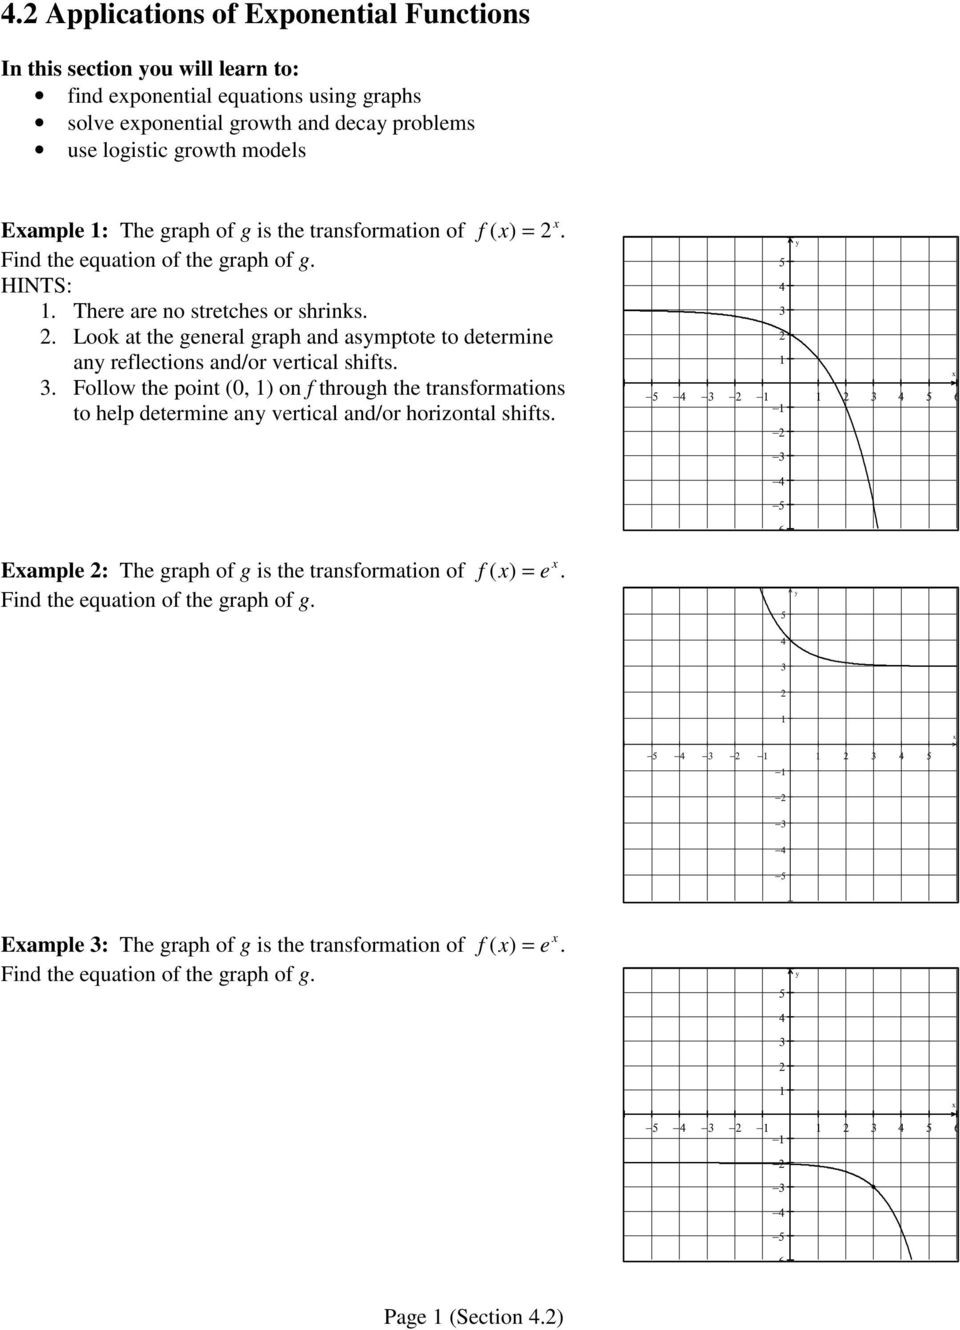 Exponential Functions Worksheet Answers 4 2 Applications Of Exponential Functions Pdf Free Download